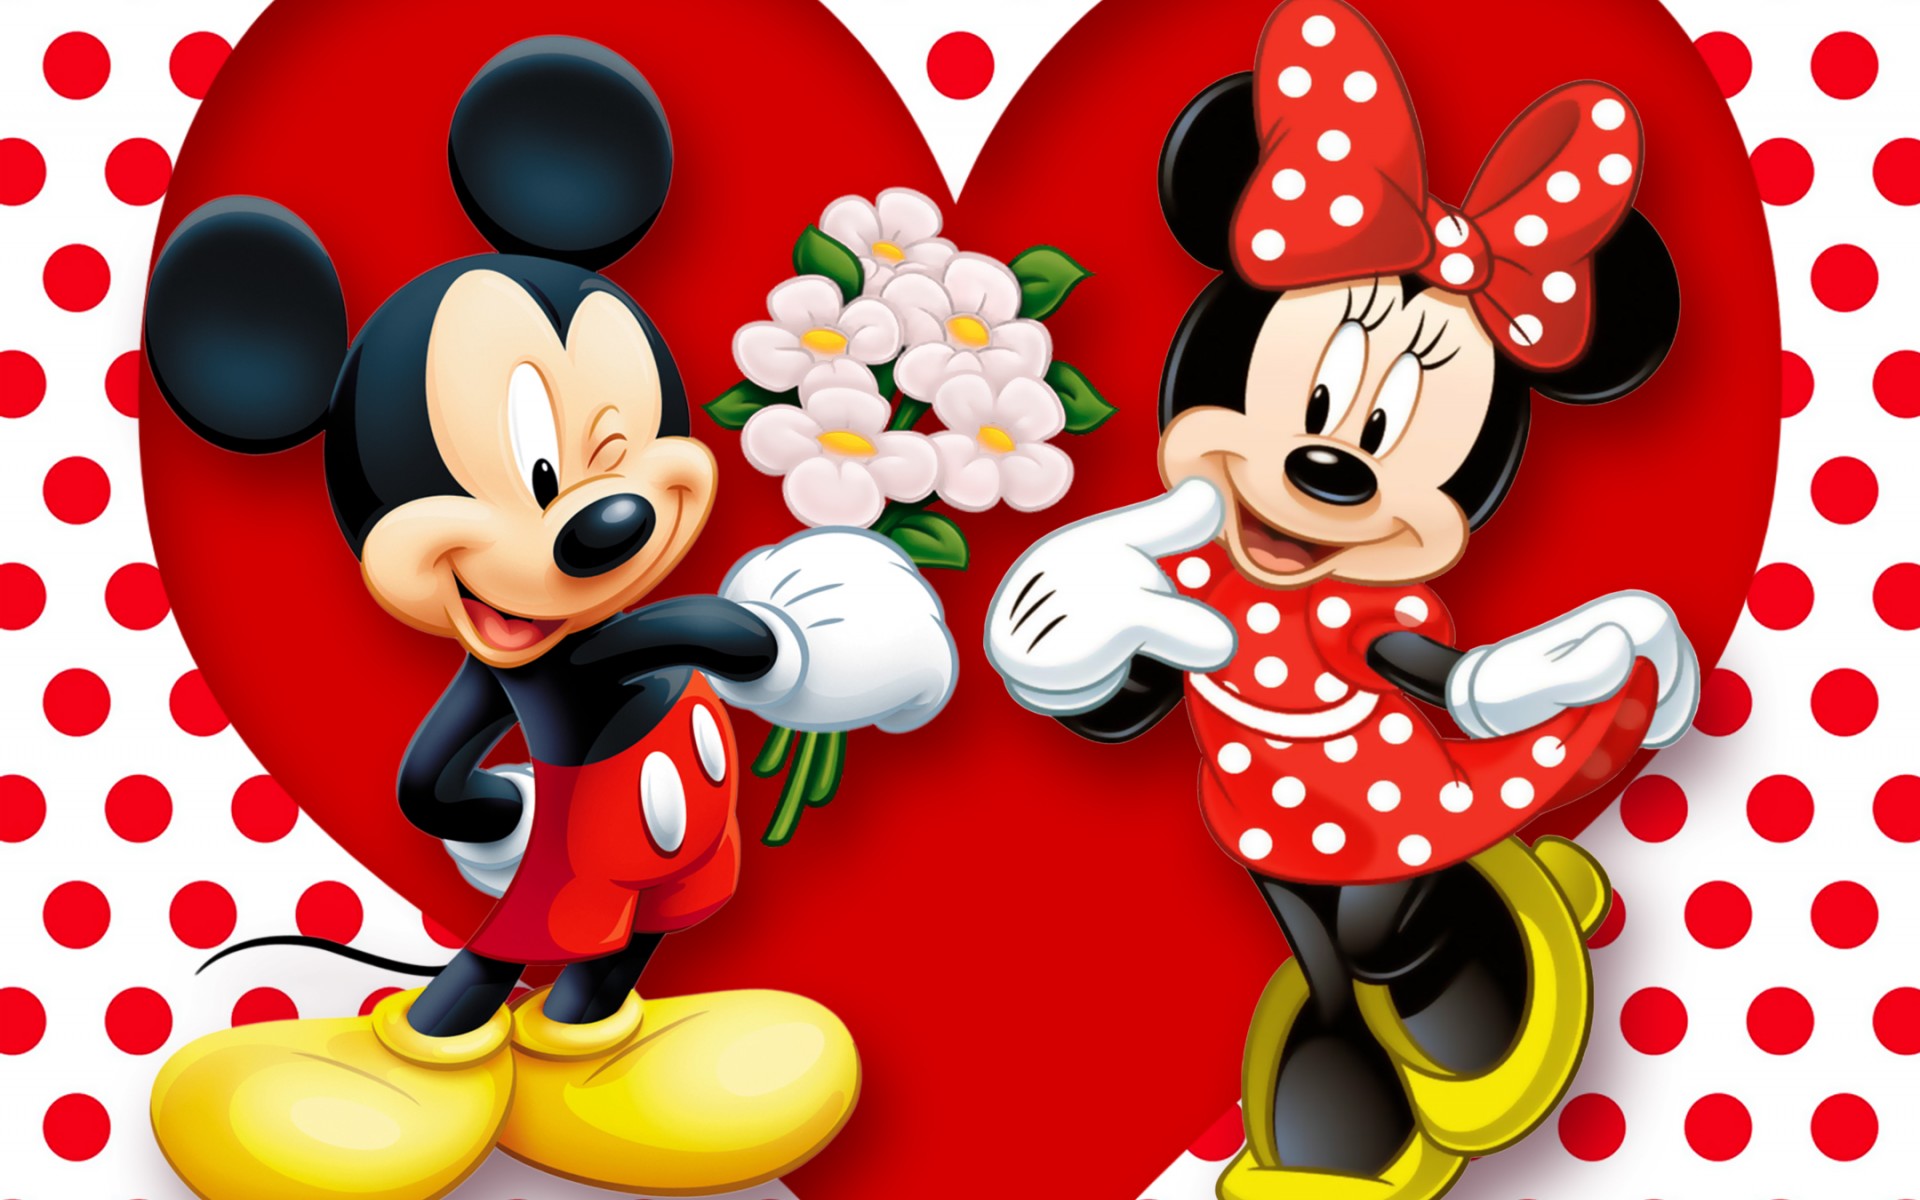 Mickey - Mickey Mouse Images Hd , HD Wallpaper & Backgrounds